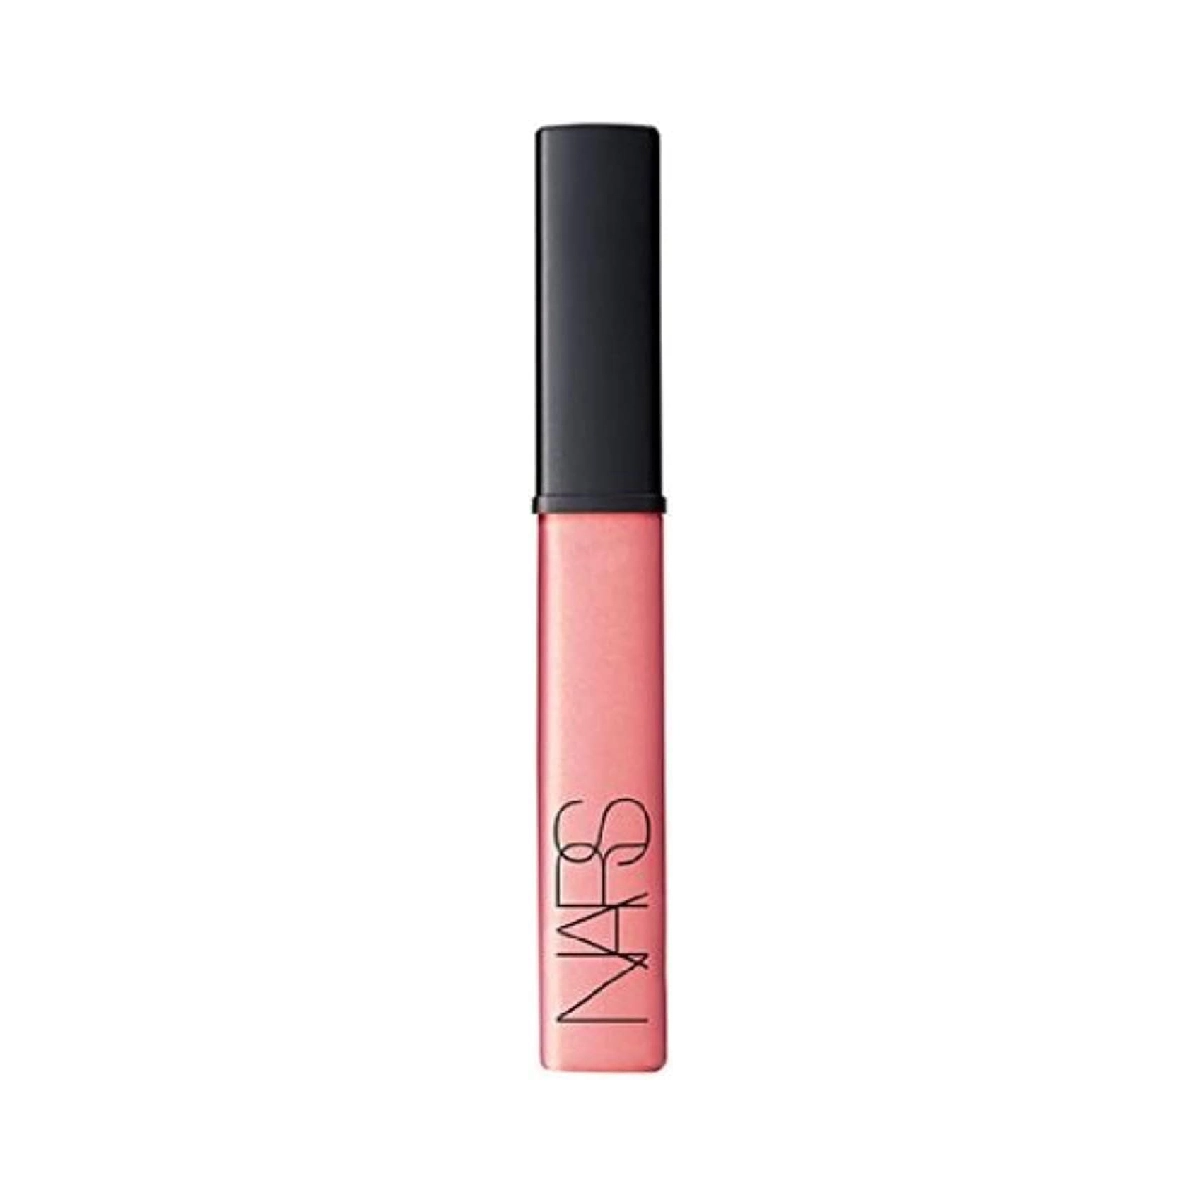 NARS Lip Gloss - a glossy lip product on a white background.